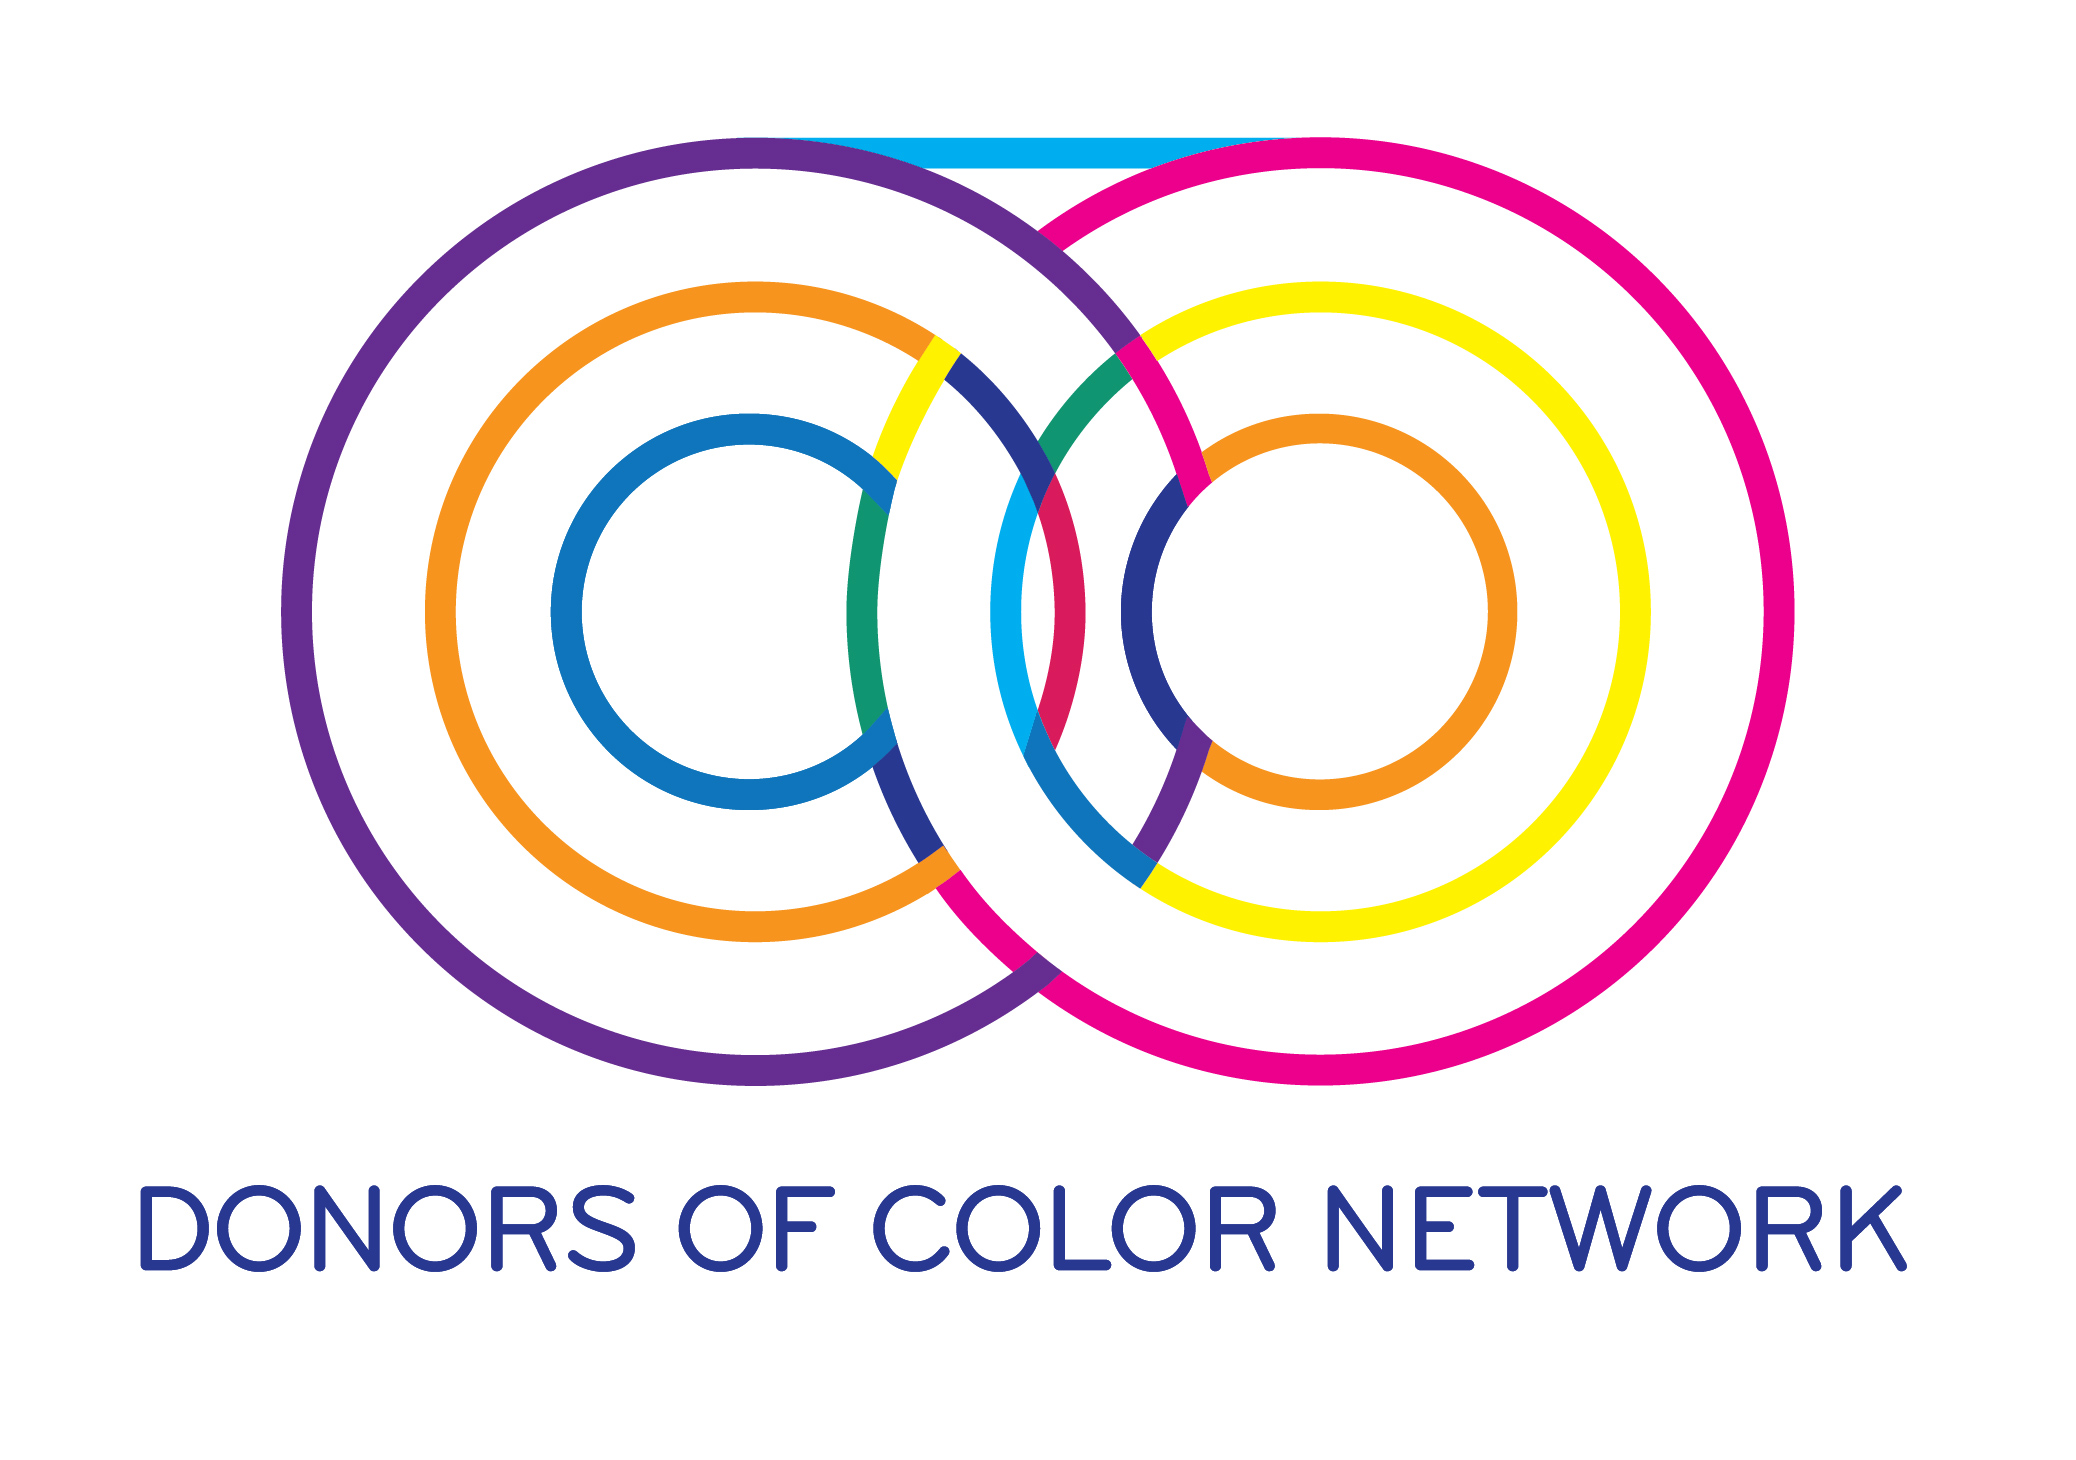 Donors of color logo